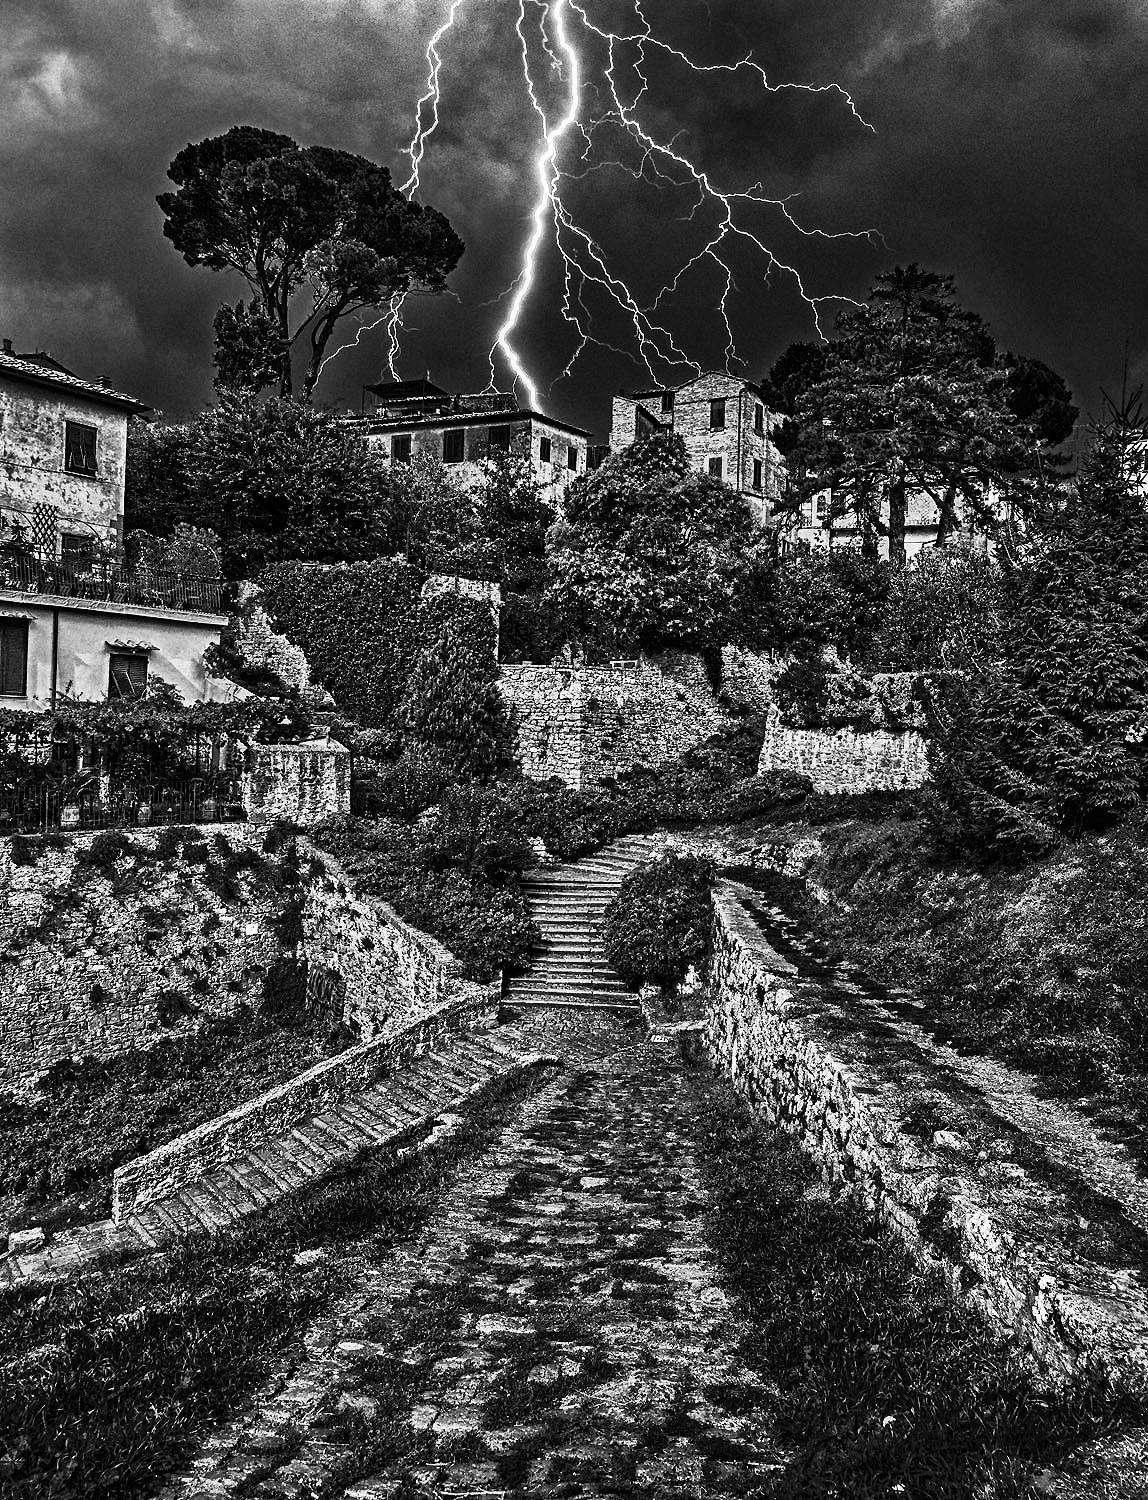 Storm, Volterra, Italy, Black-and-White Landscape Photography in Tuscany